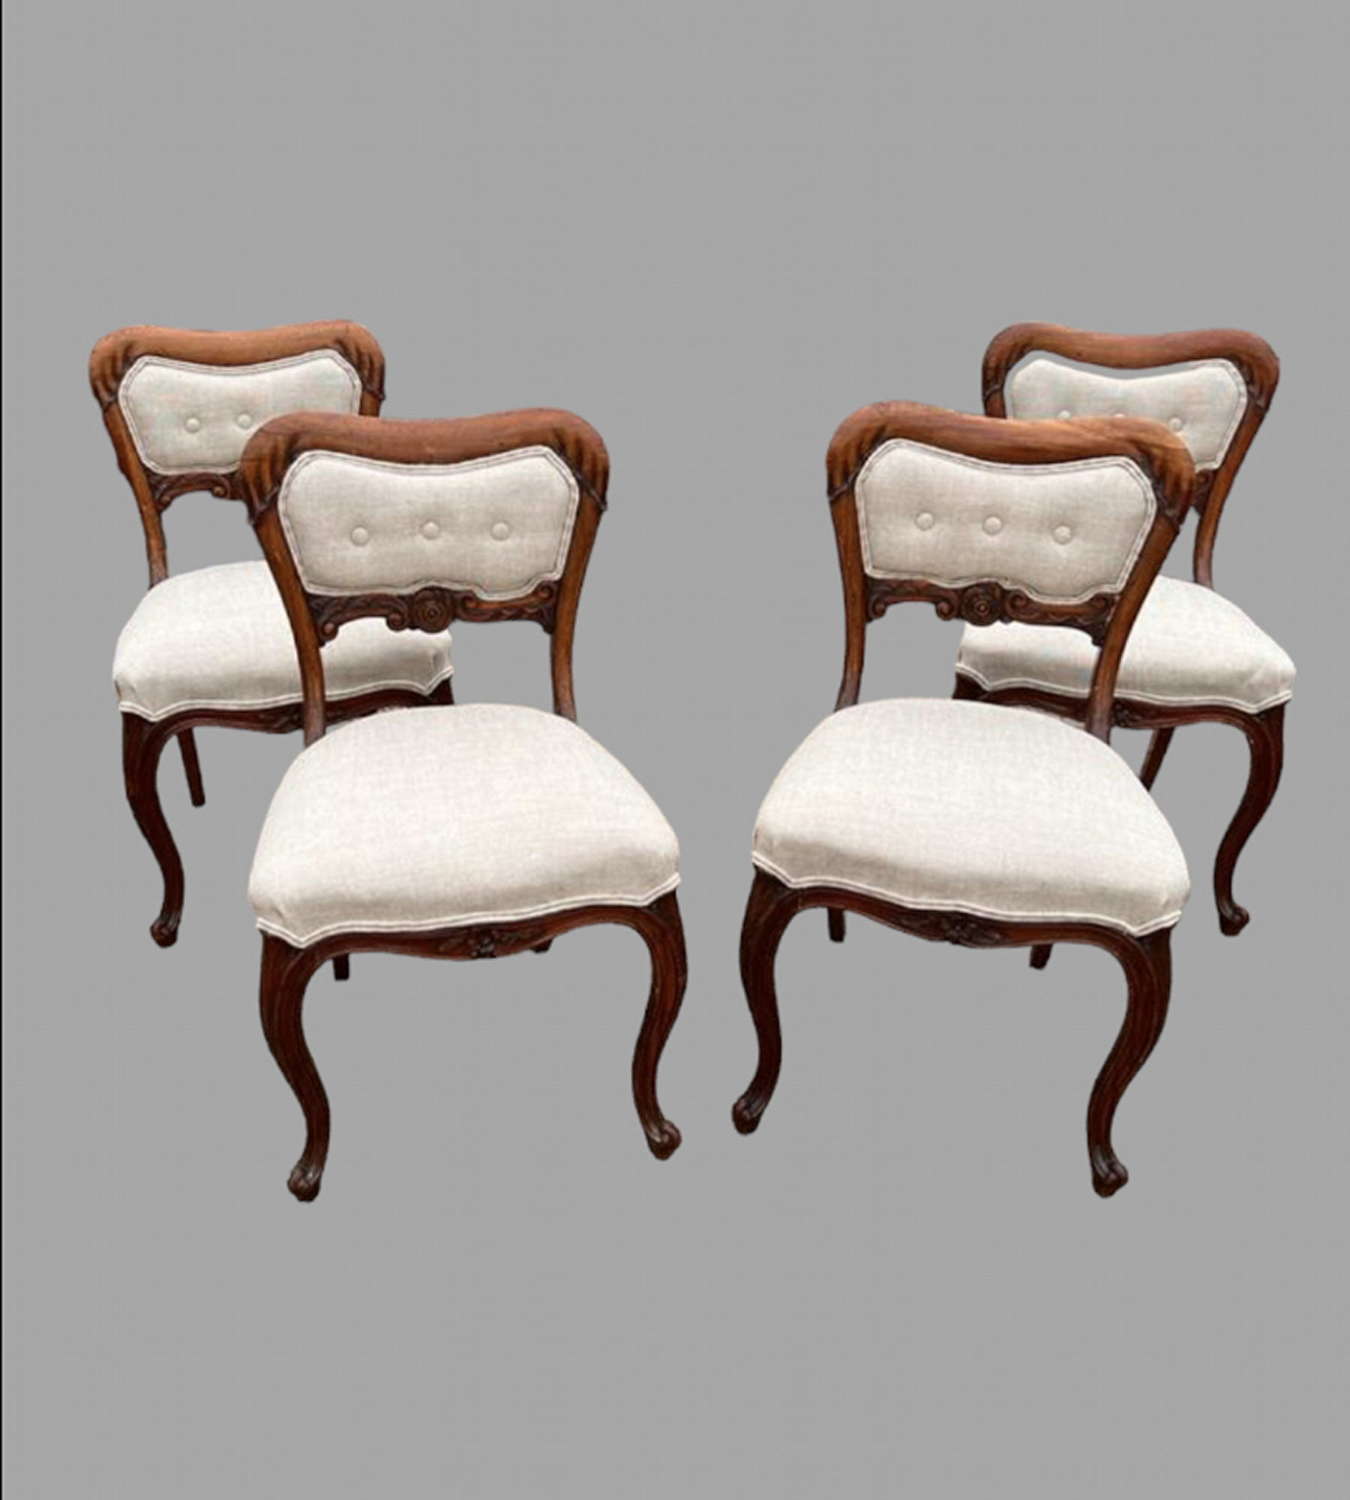 A Set of Four Walnut Chairs Late 19thc